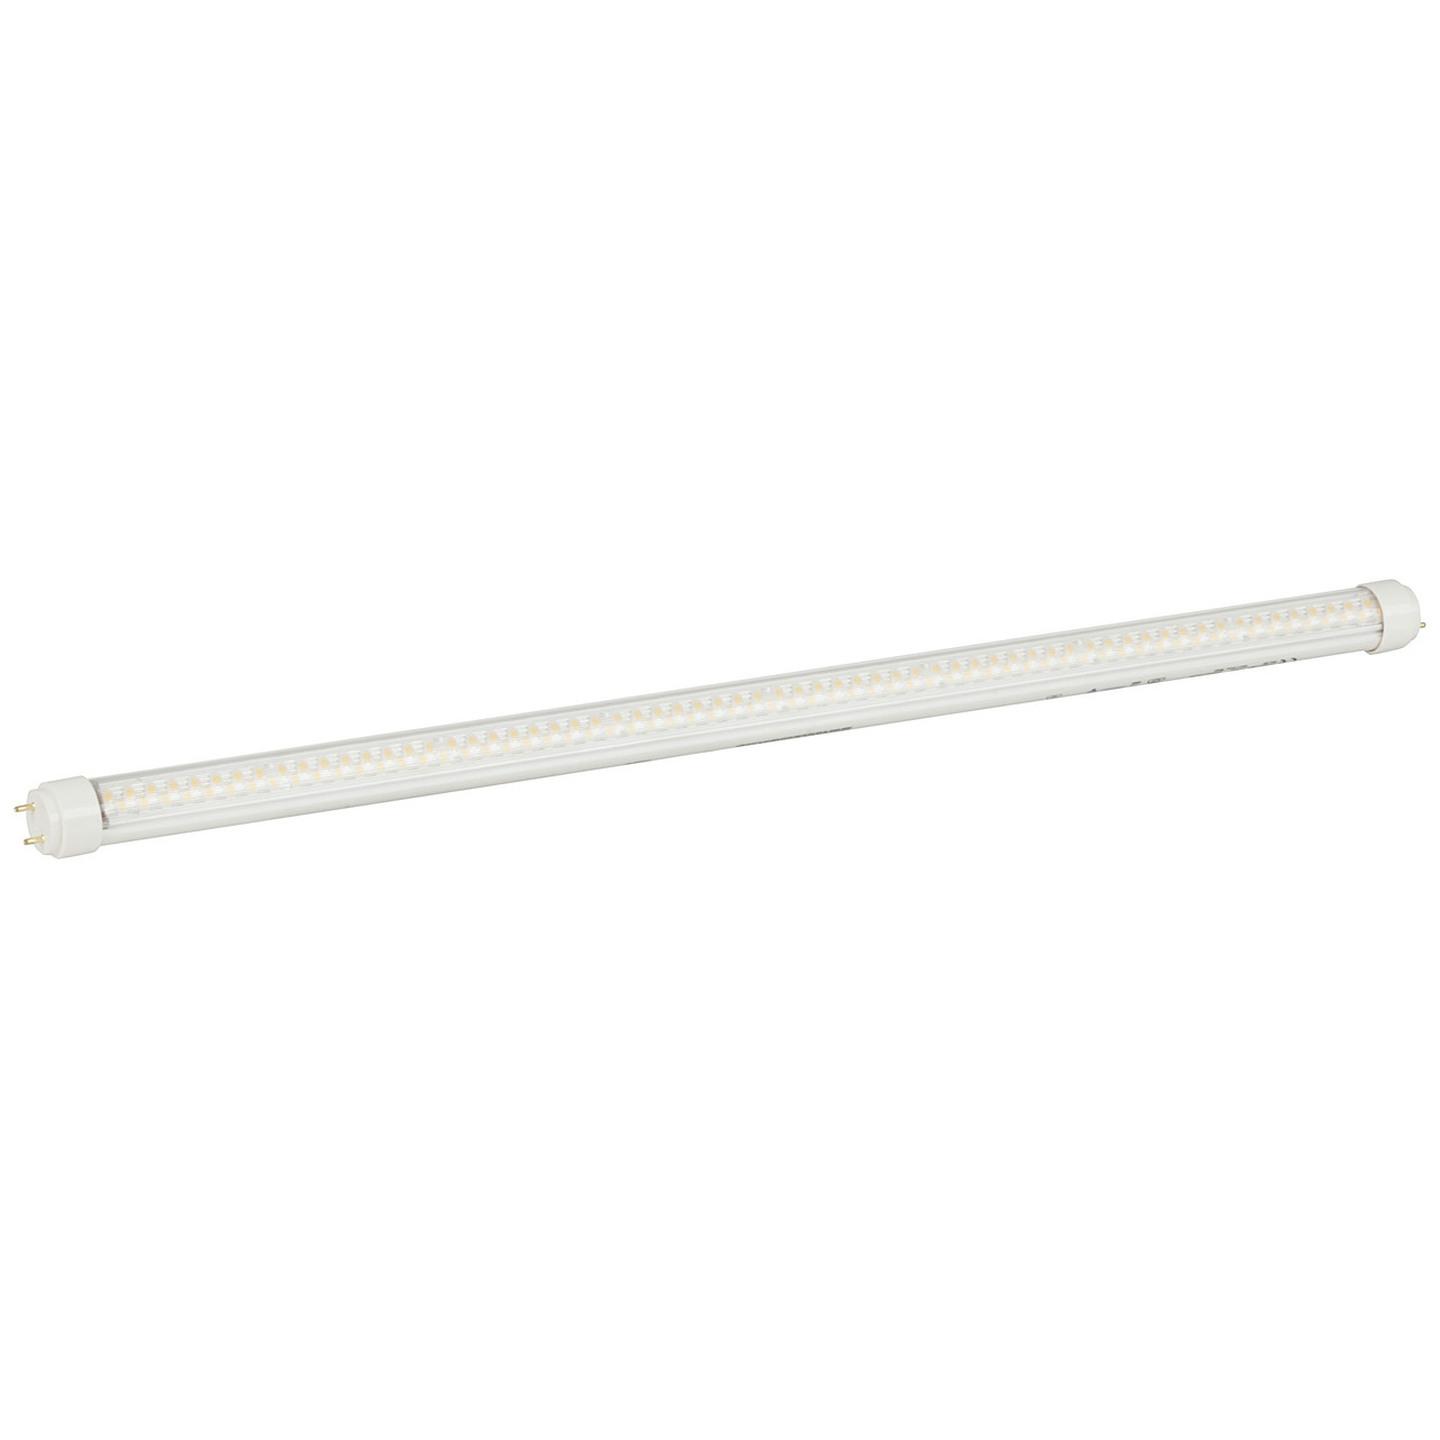 Viribright LED T8 Fluoro Replacement Tube 20W 1200mm Natural White